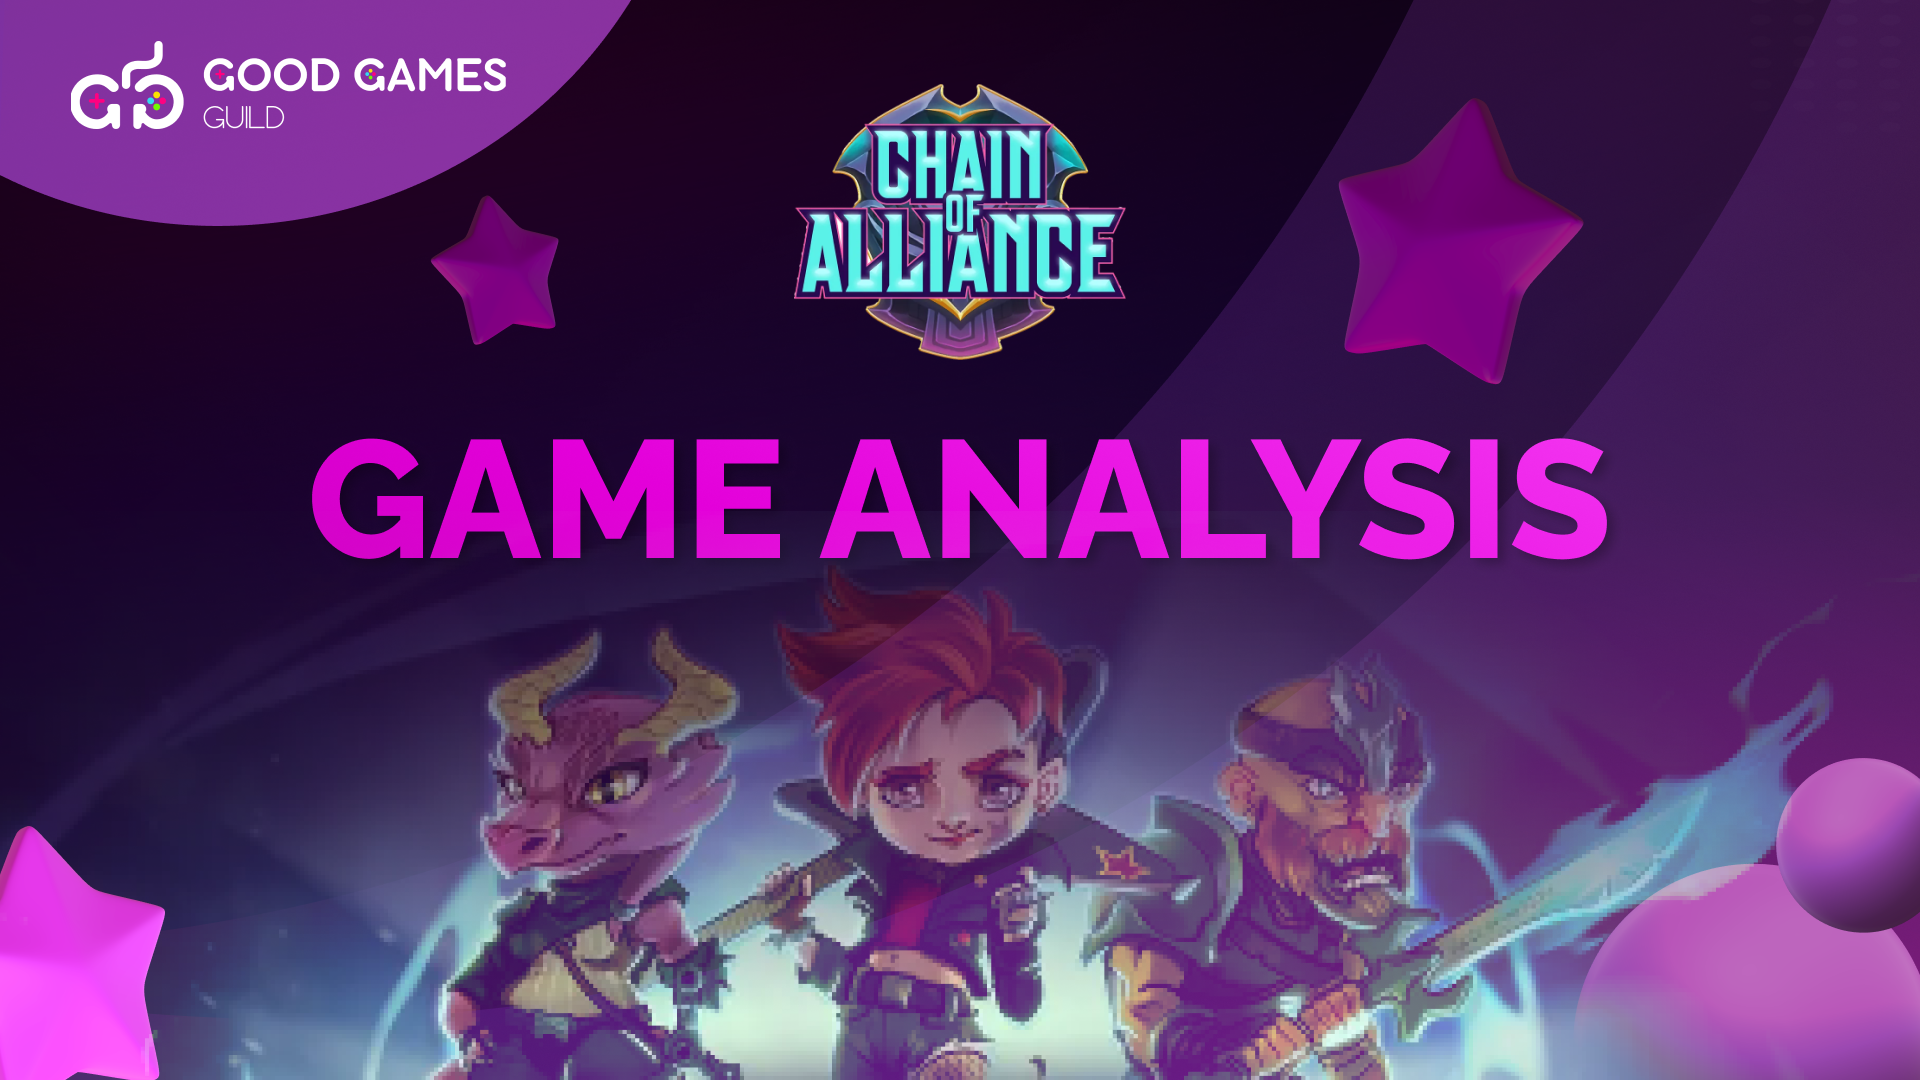 Game Analysis: Chain of Alliance